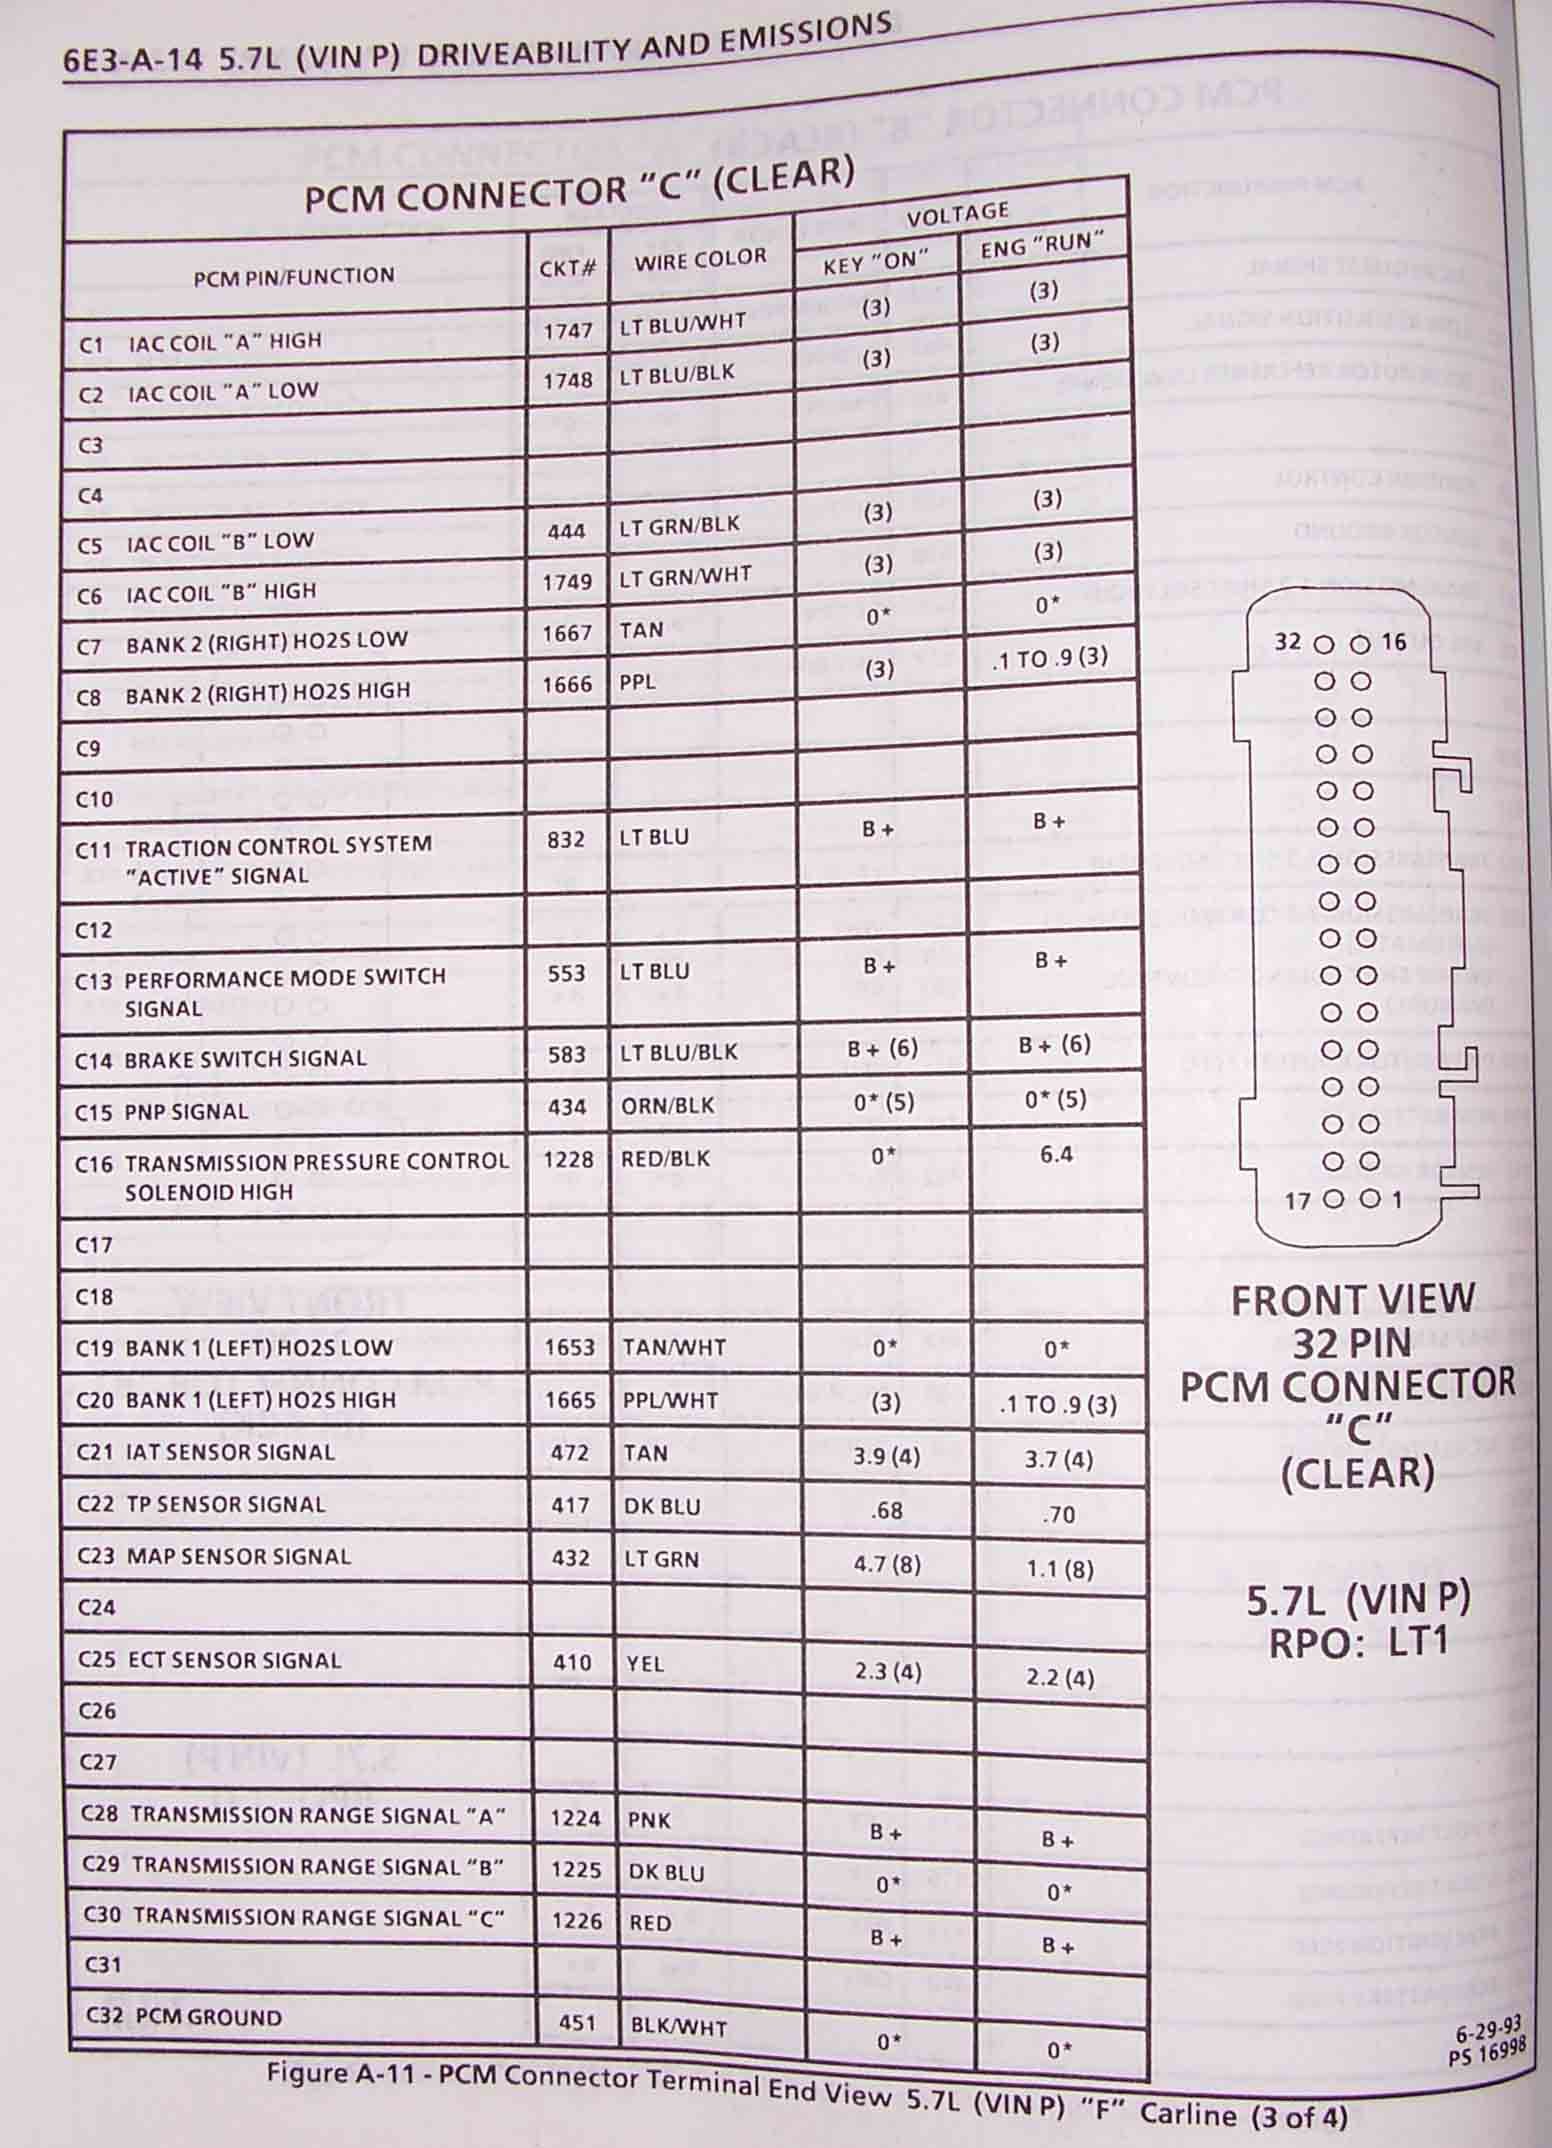 PCM Connector Pinout OB1 Cars 94-95 from FSM ... 89 trans am wiring diagram 